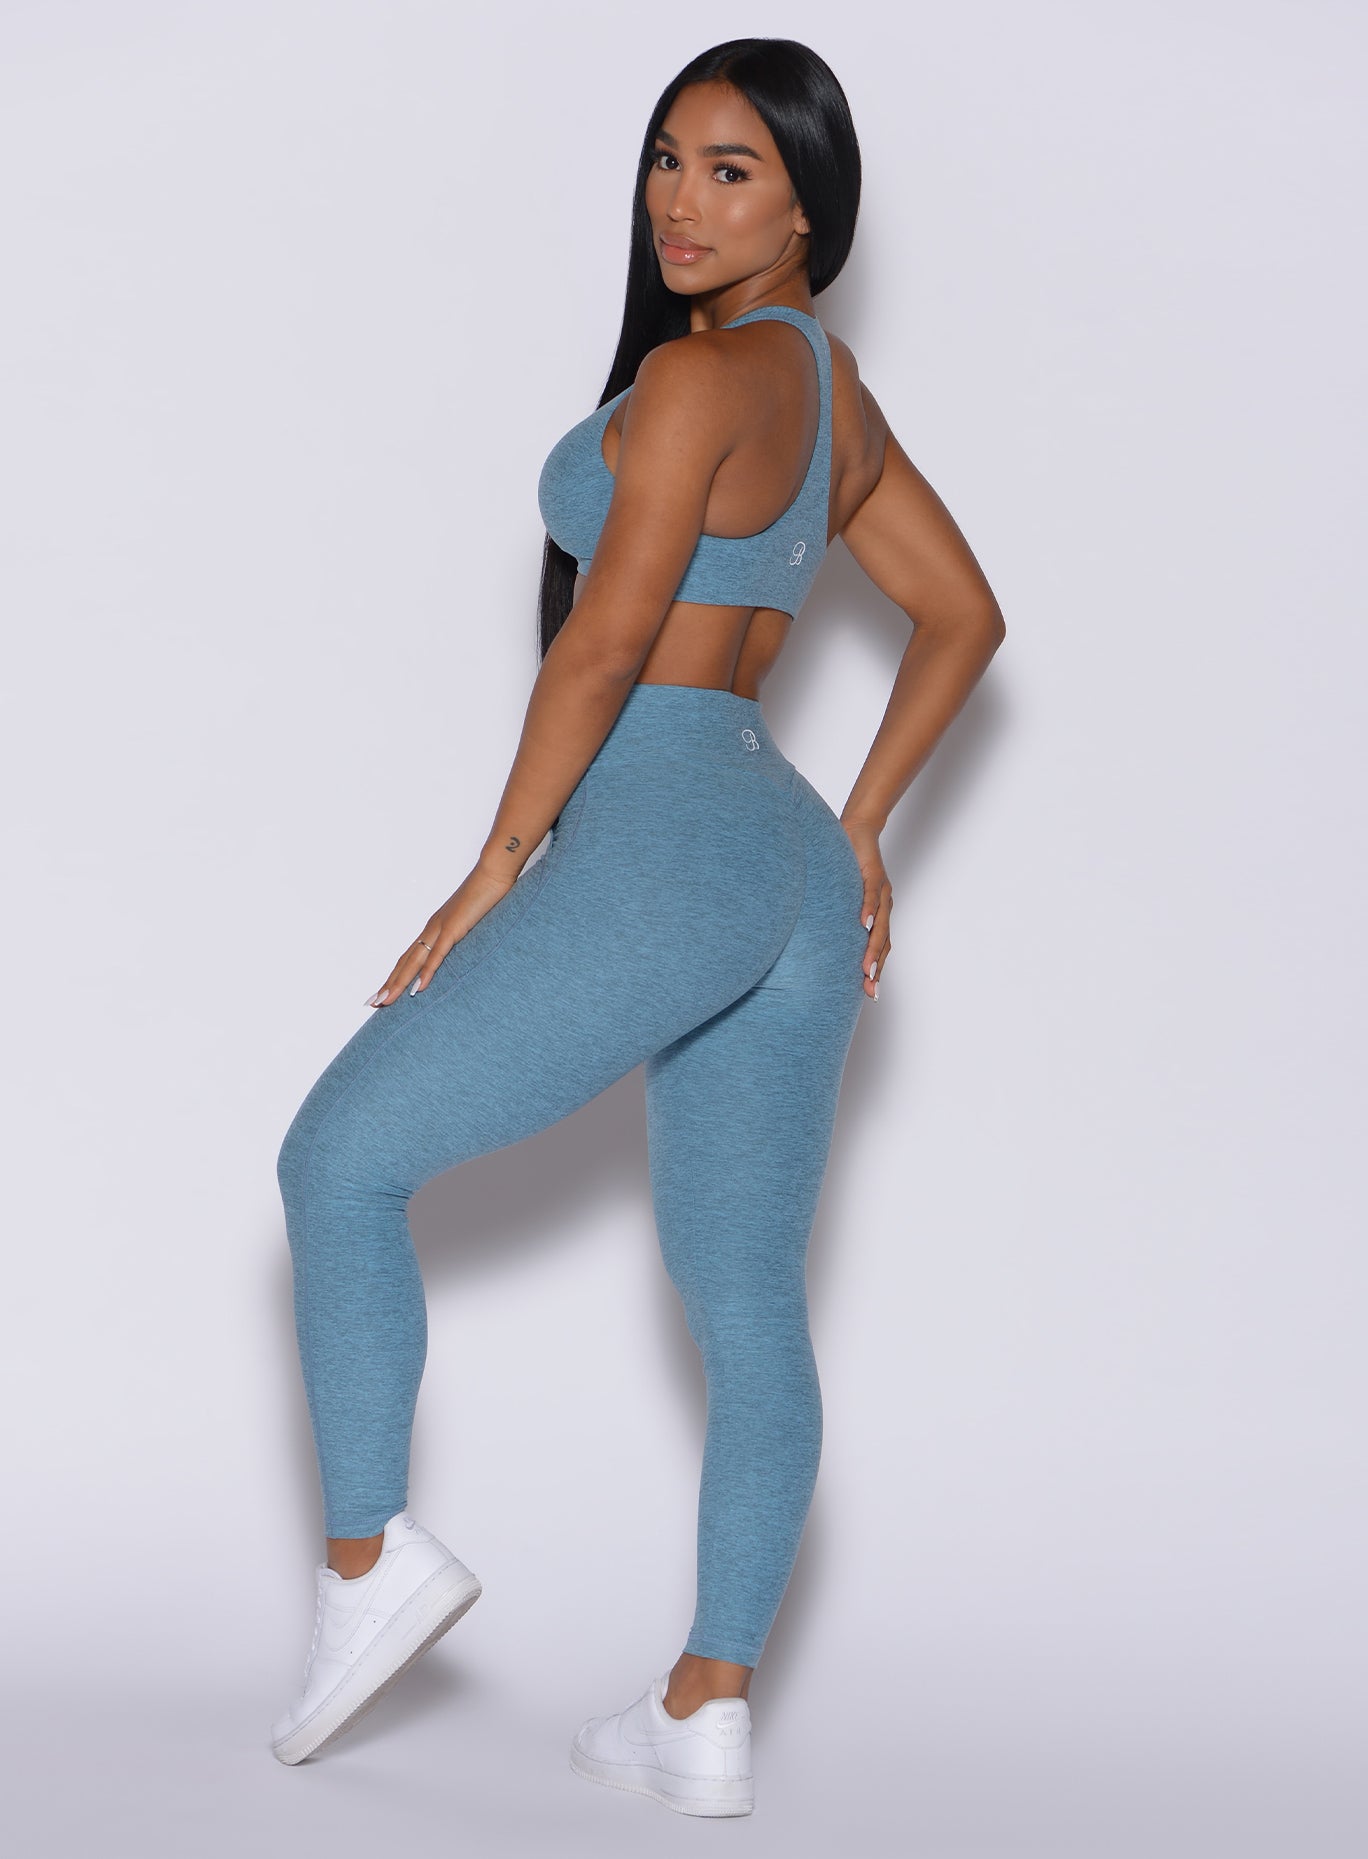 Left side  profile view of a model facing to her left wearing our our V scrunch leggings in babyblue color and a matching bra